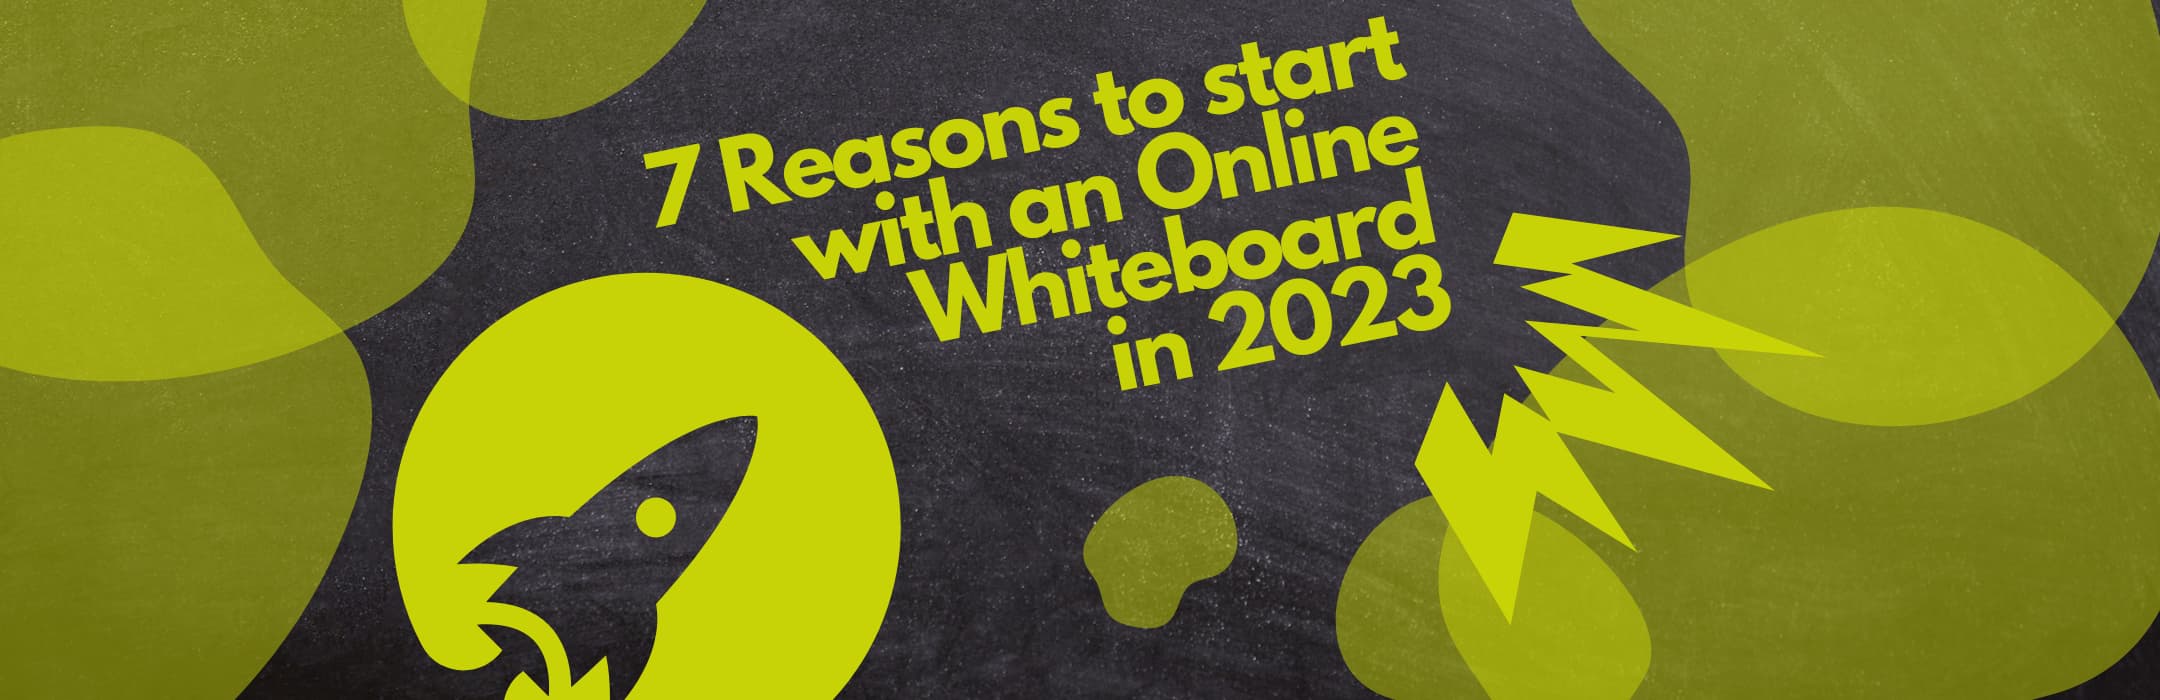 7 Reasons why to start with an Online Whiteboard...